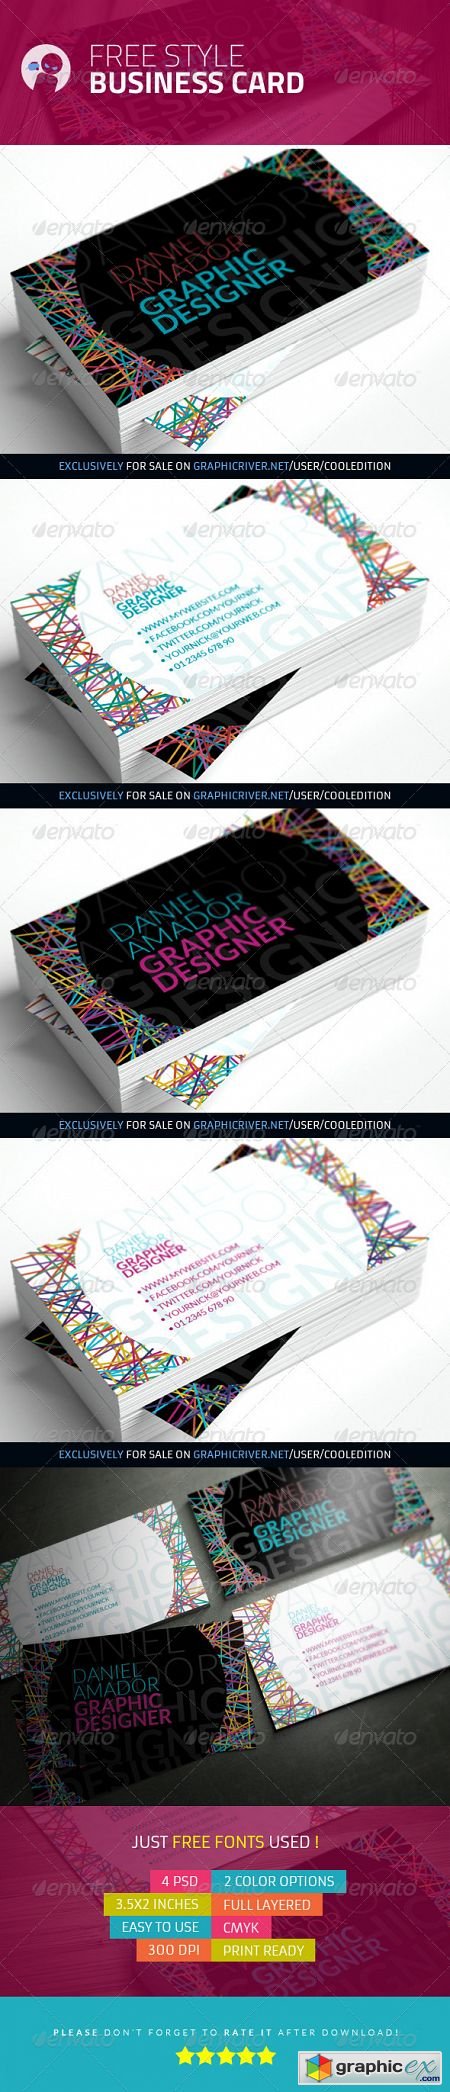 Free Style - Business Card 3575896